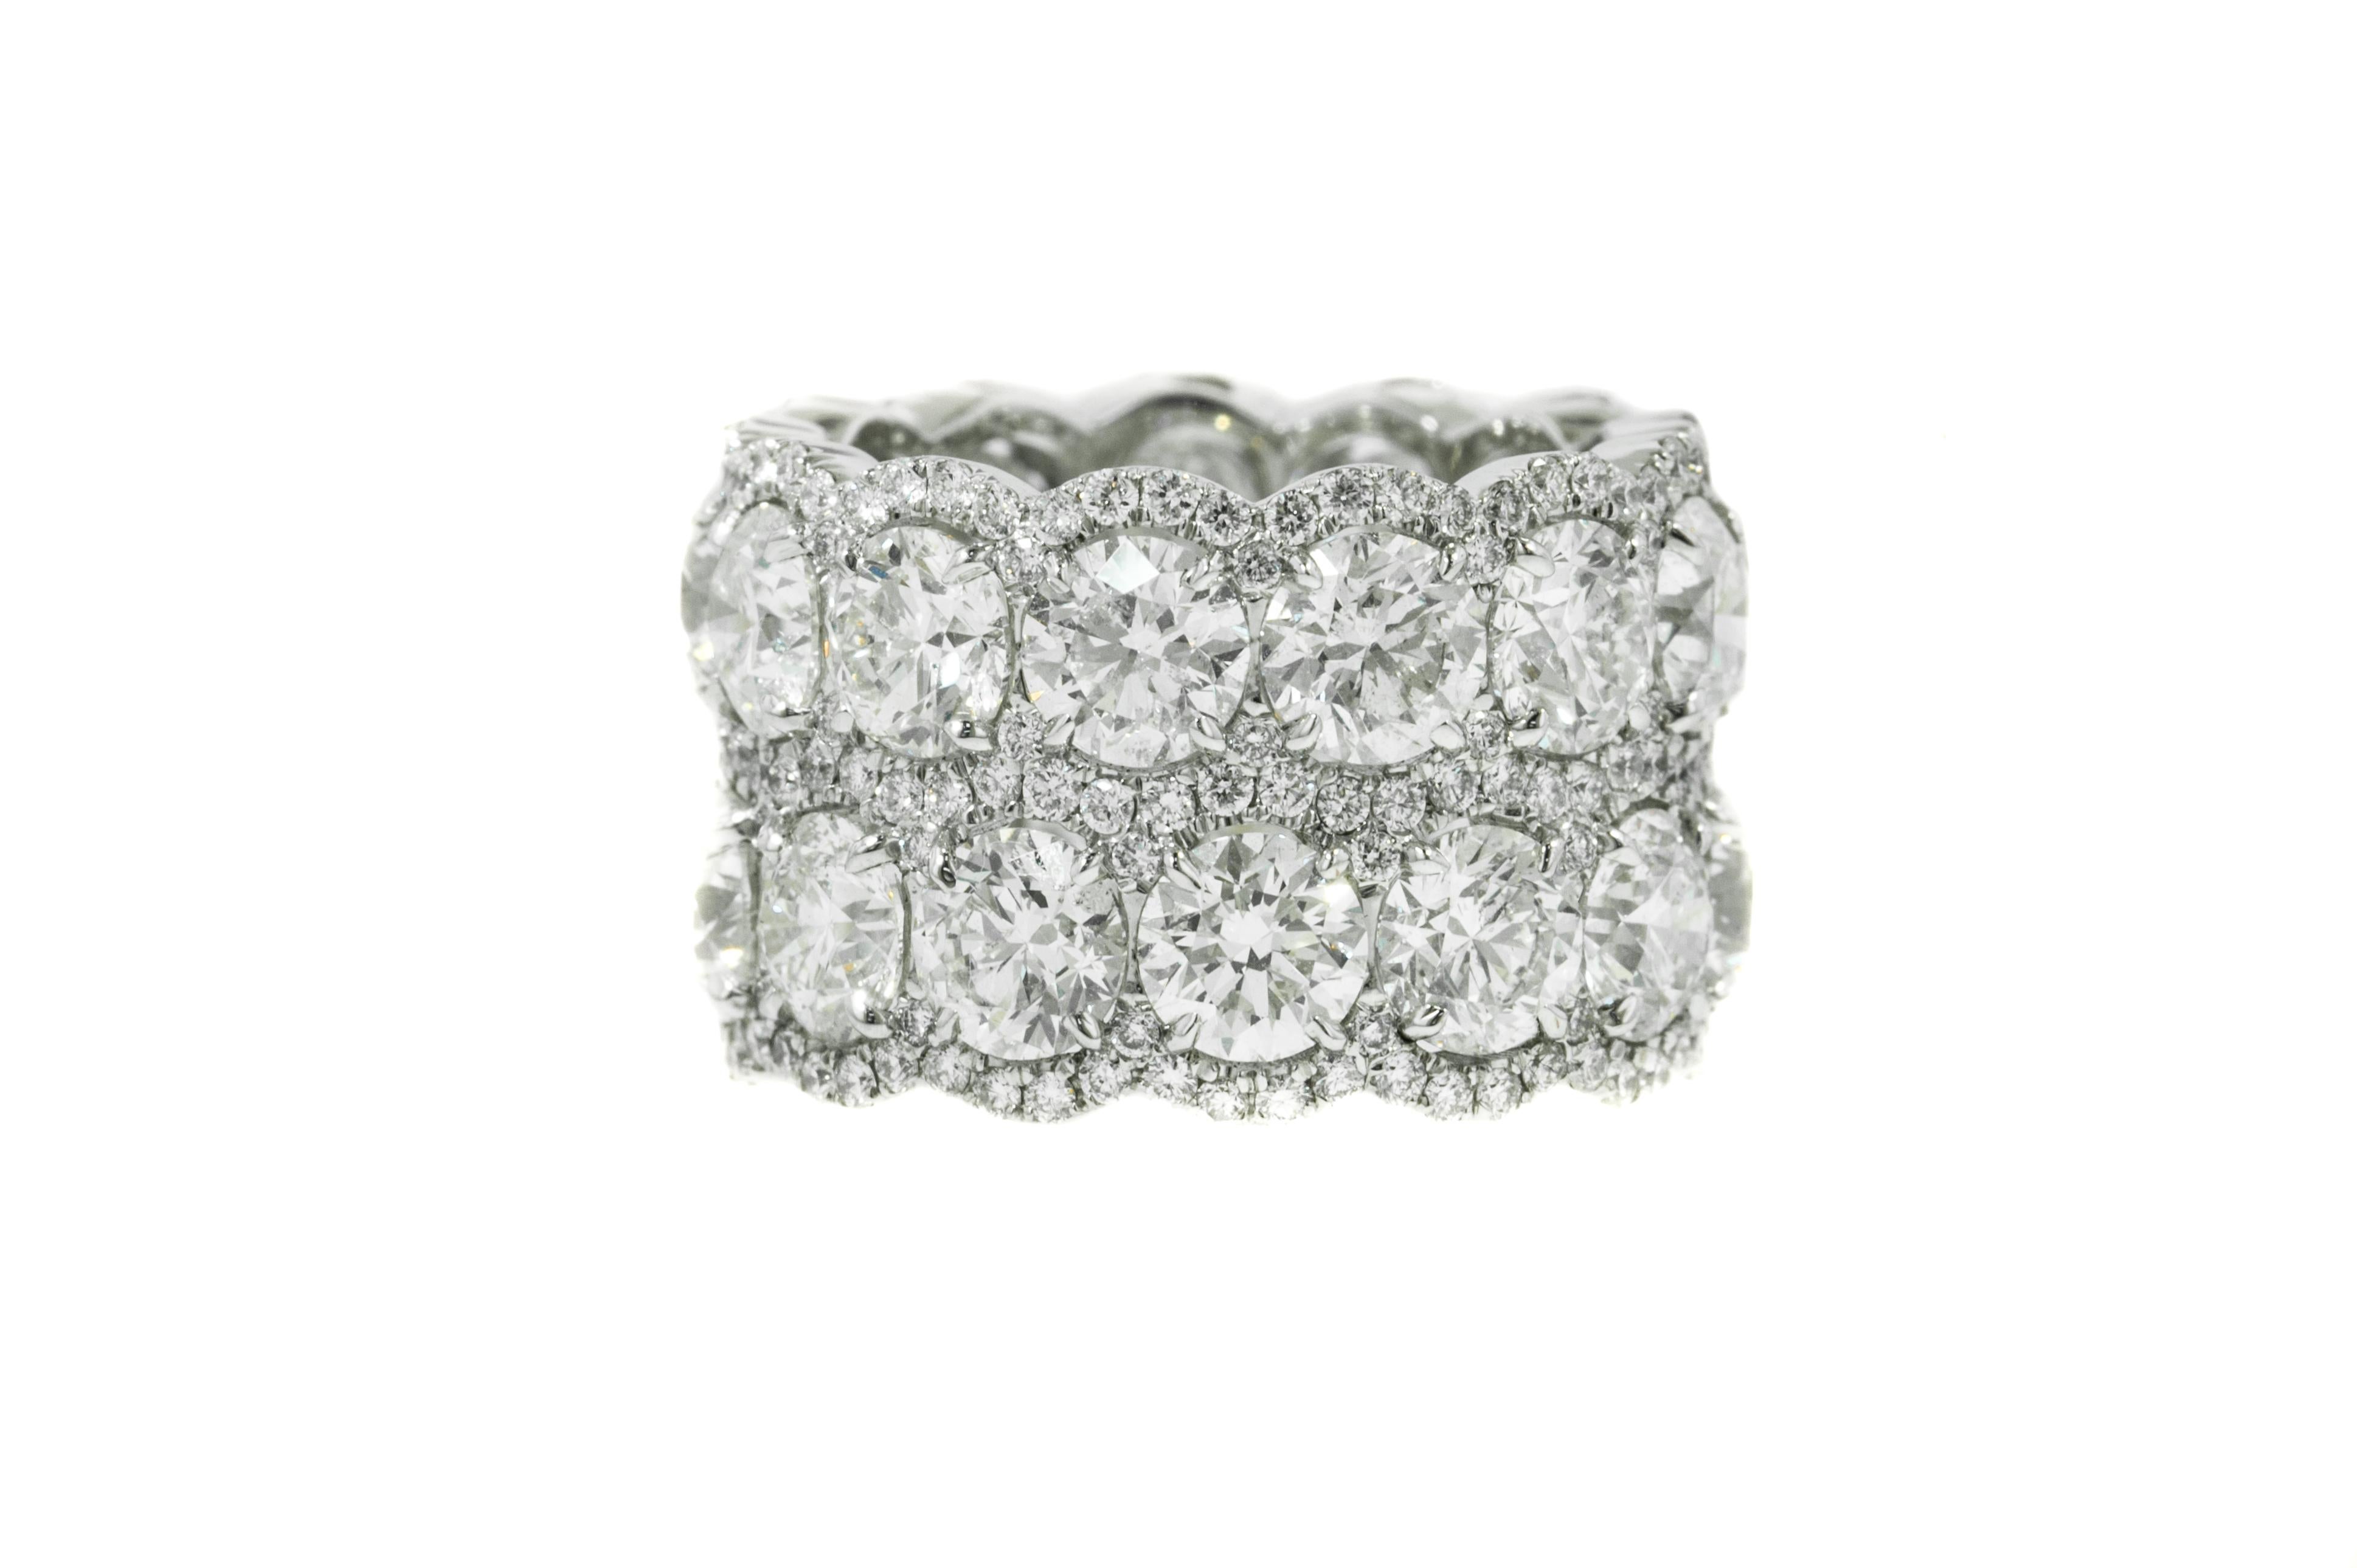 Platinum  diamond two rows etetnity  band  with 13.00ct  of 26 round diamonds set with 1.45ct  of micropave  round diamonds all  around.
Diana M. is a leading supplier of top-quality fine jewelry for over 35 years.
Diana M is one-stop shop for all